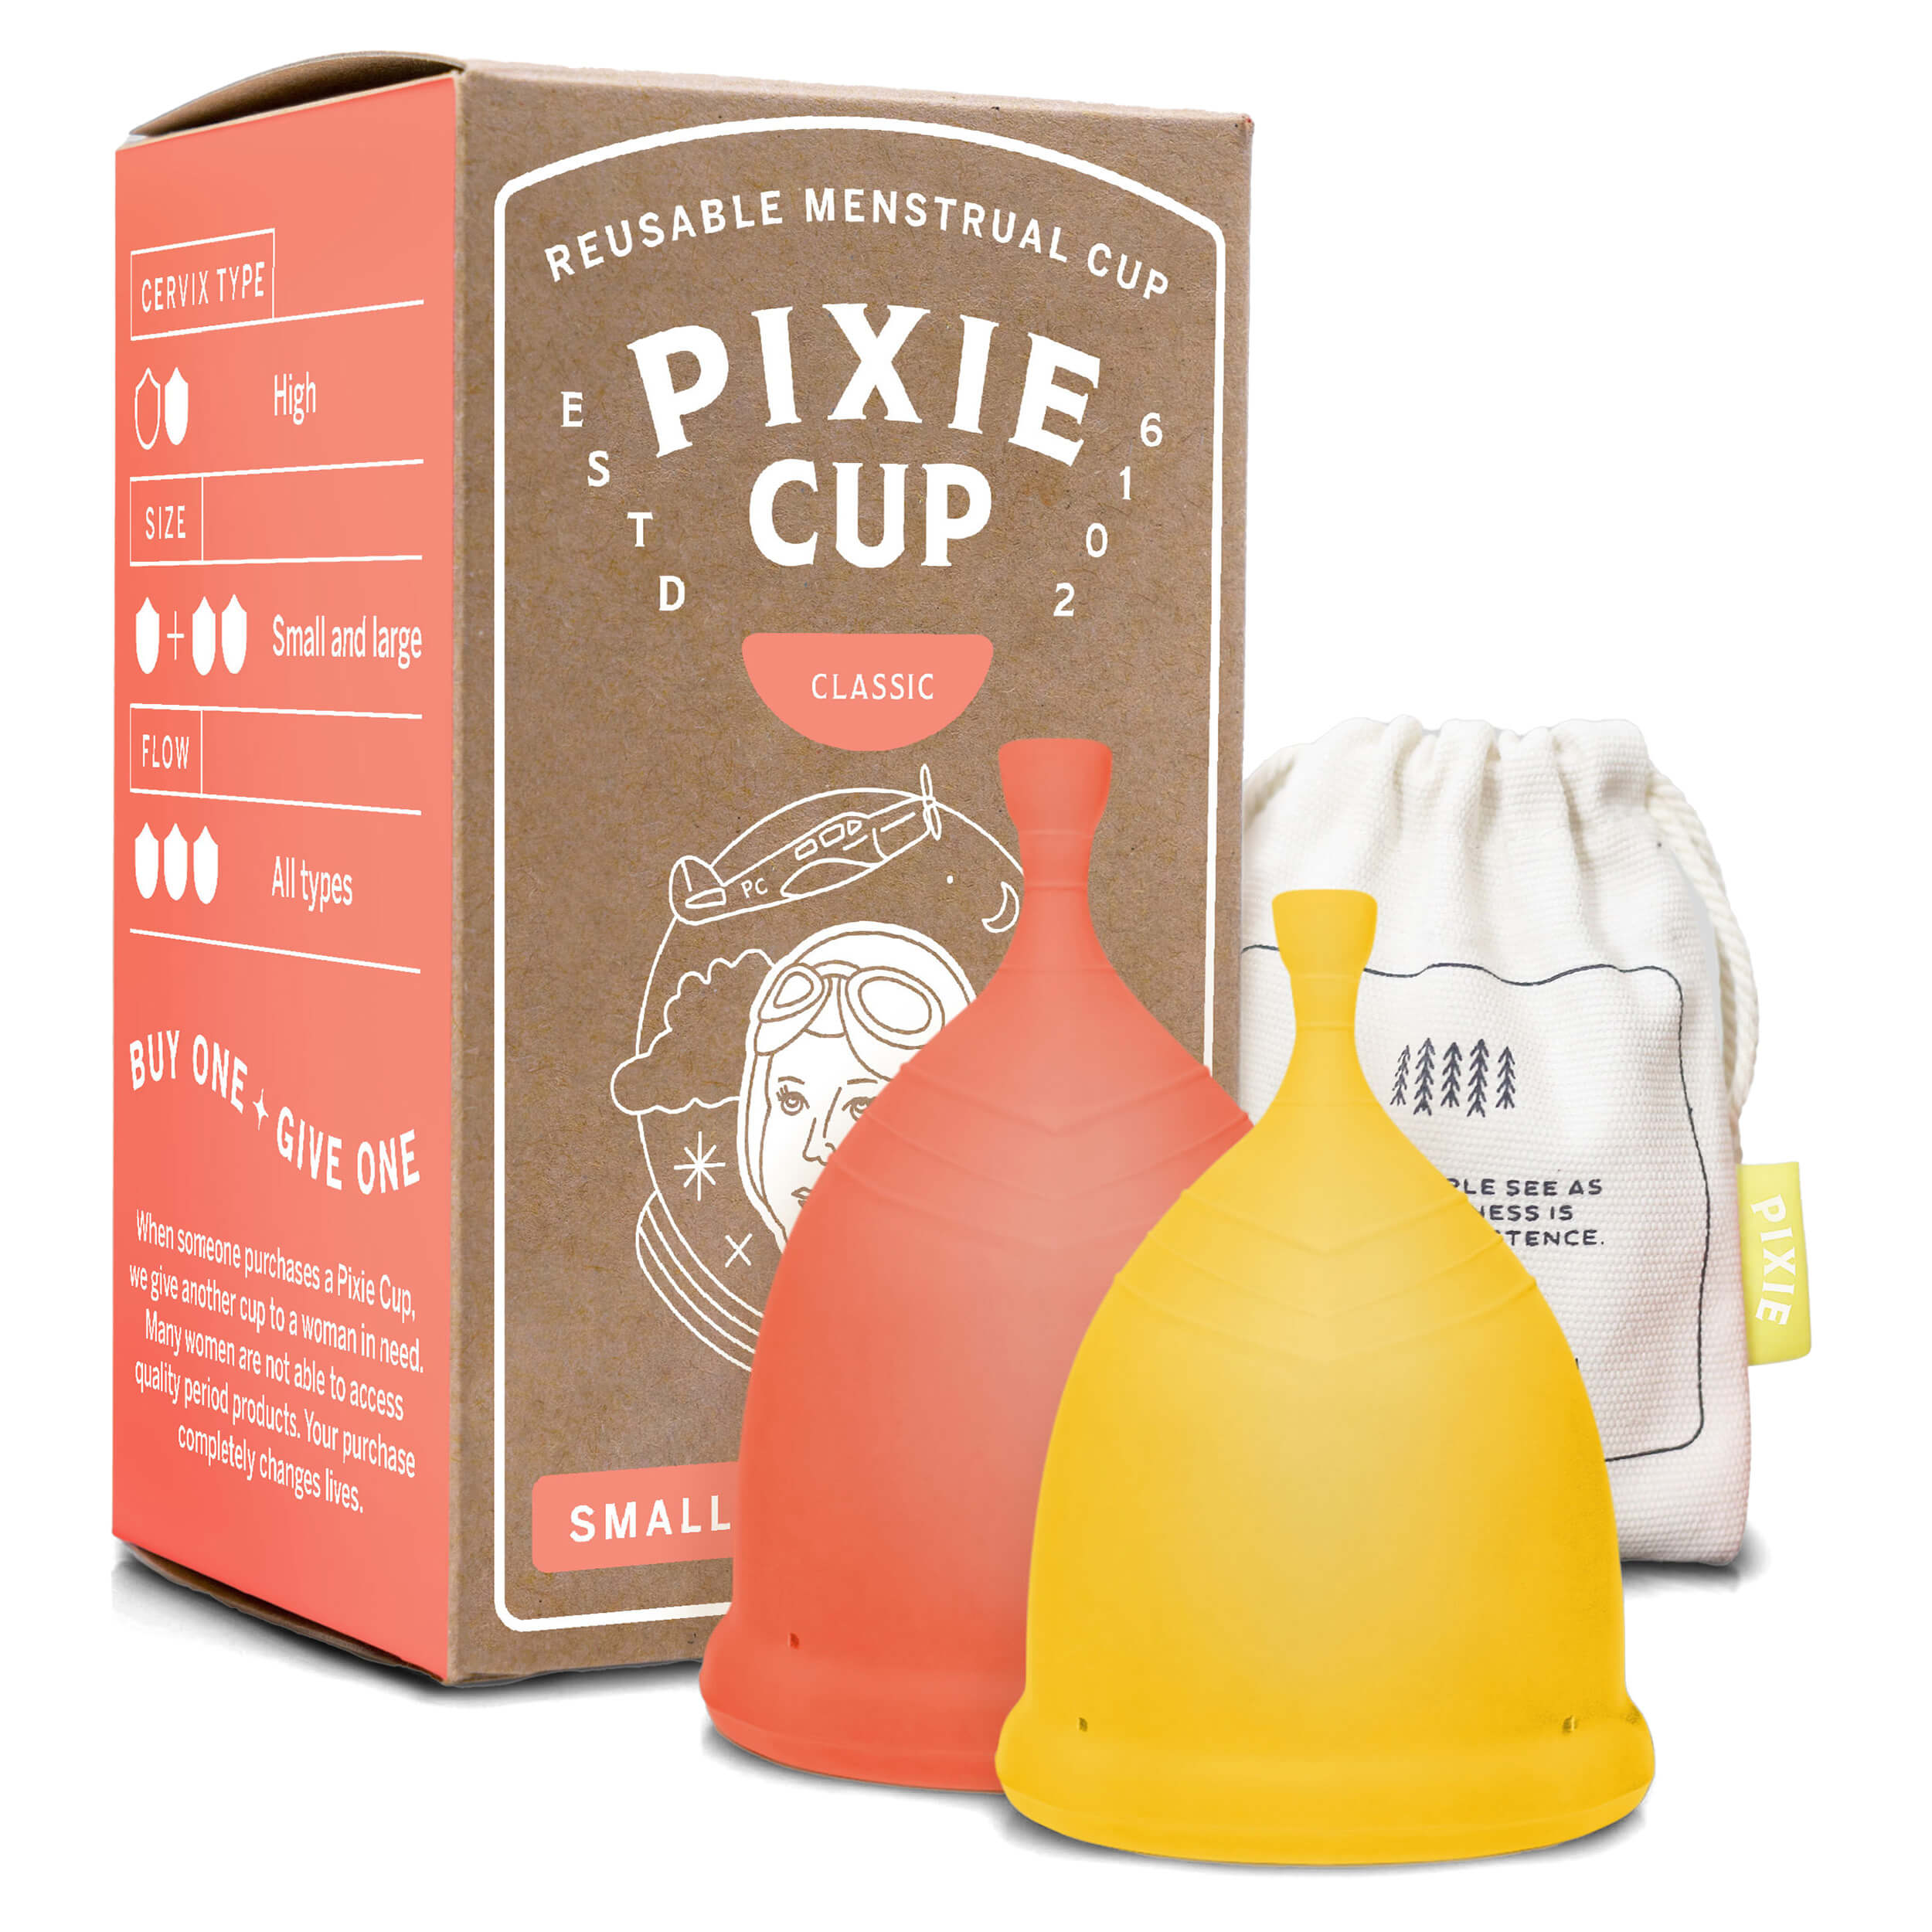 Pixie Classic Combo Pack menstrual cups